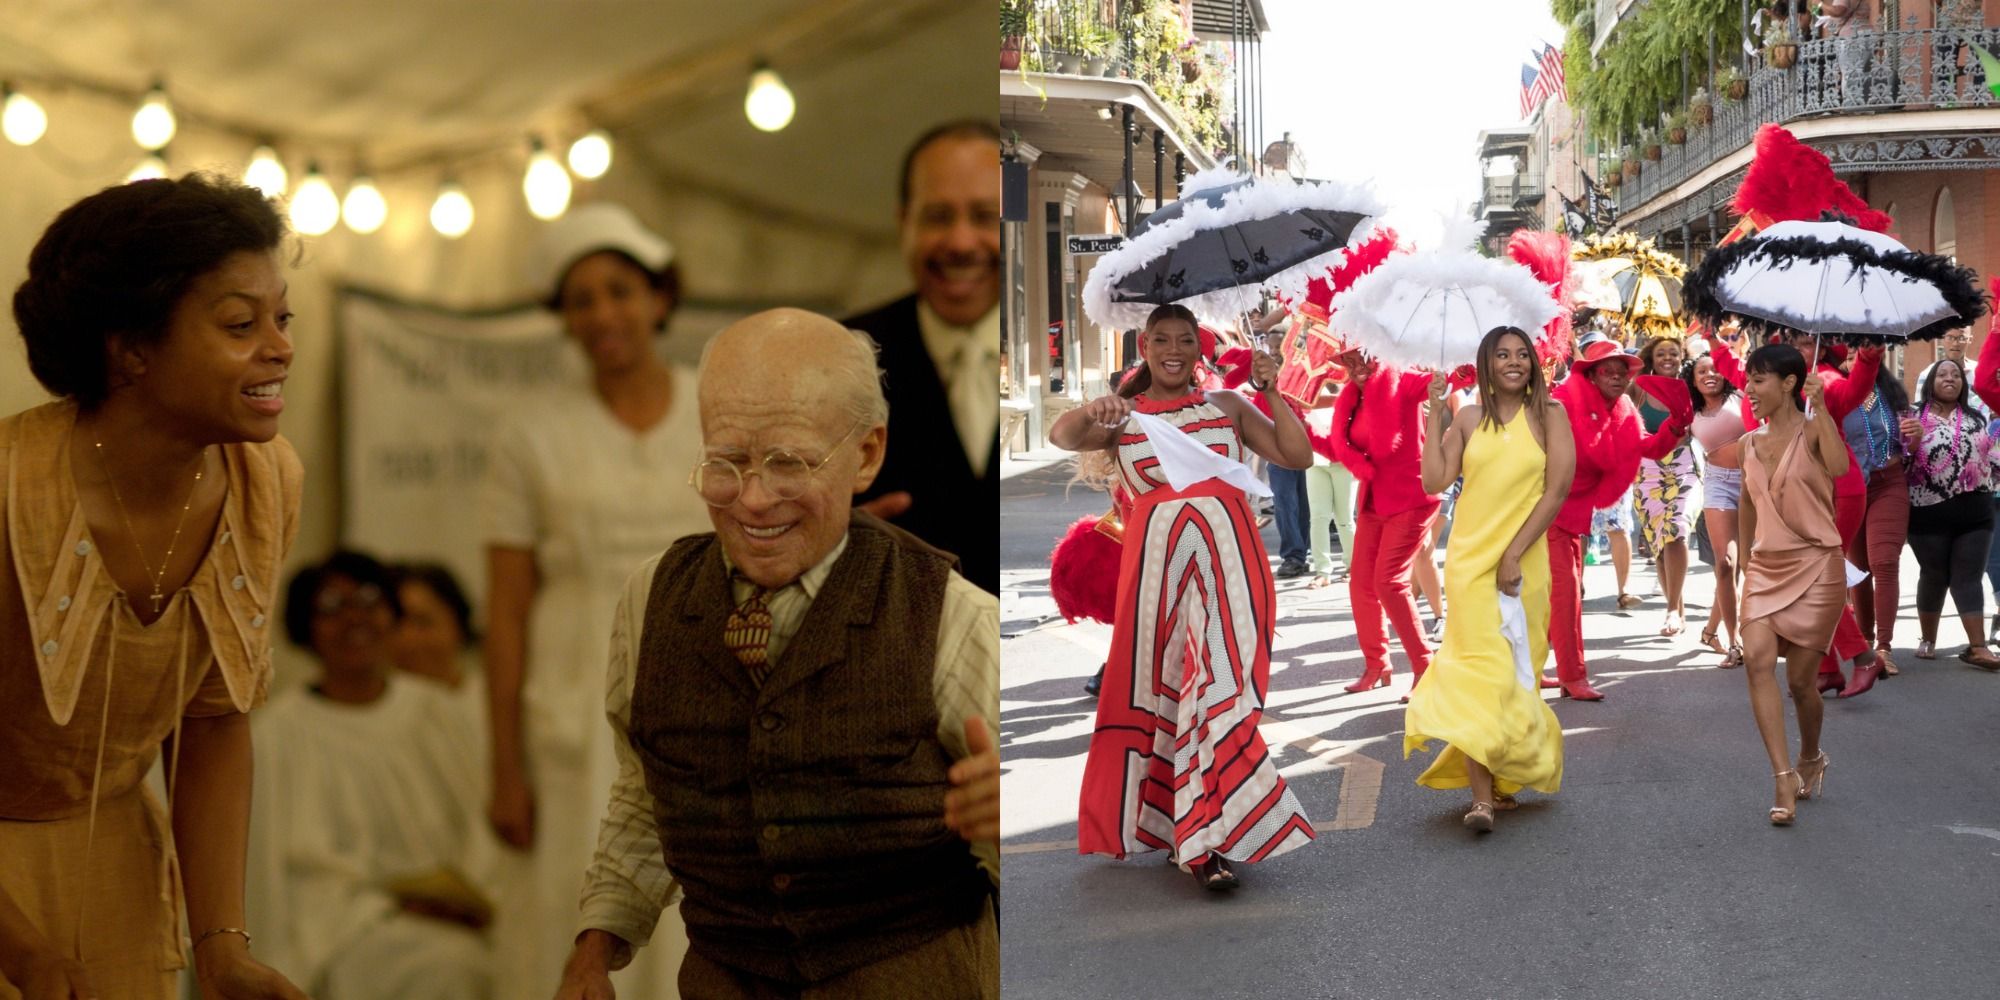 Split image showing scenes from Benjamin Button and Girls Trip